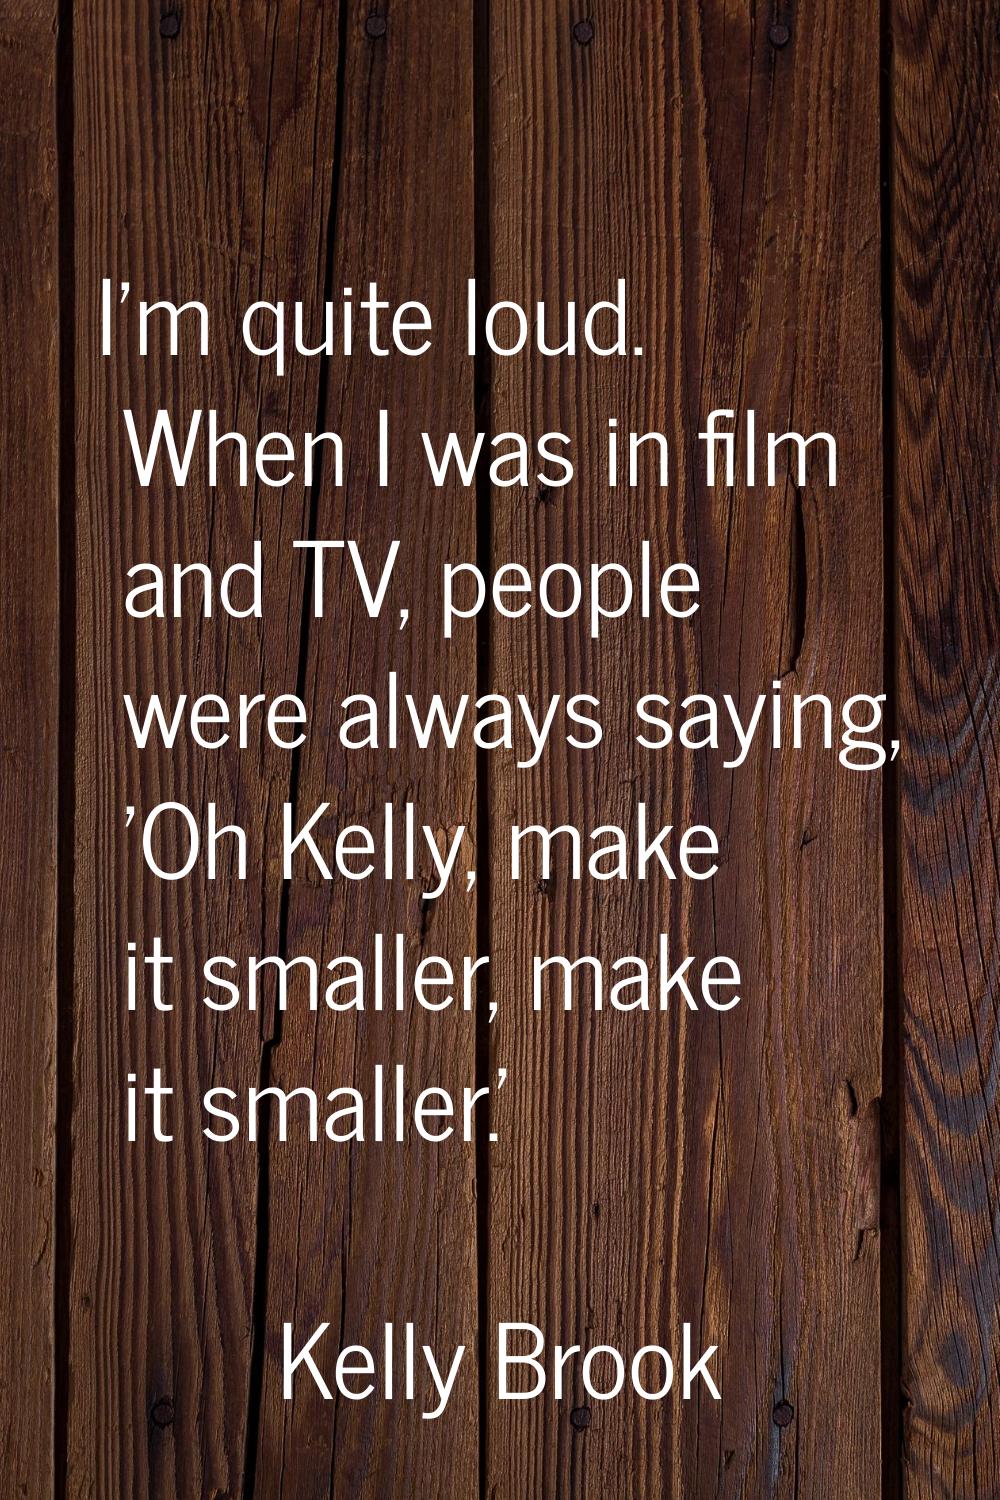 I'm quite loud. When I was in film and TV, people were always saying, 'Oh Kelly, make it smaller, m